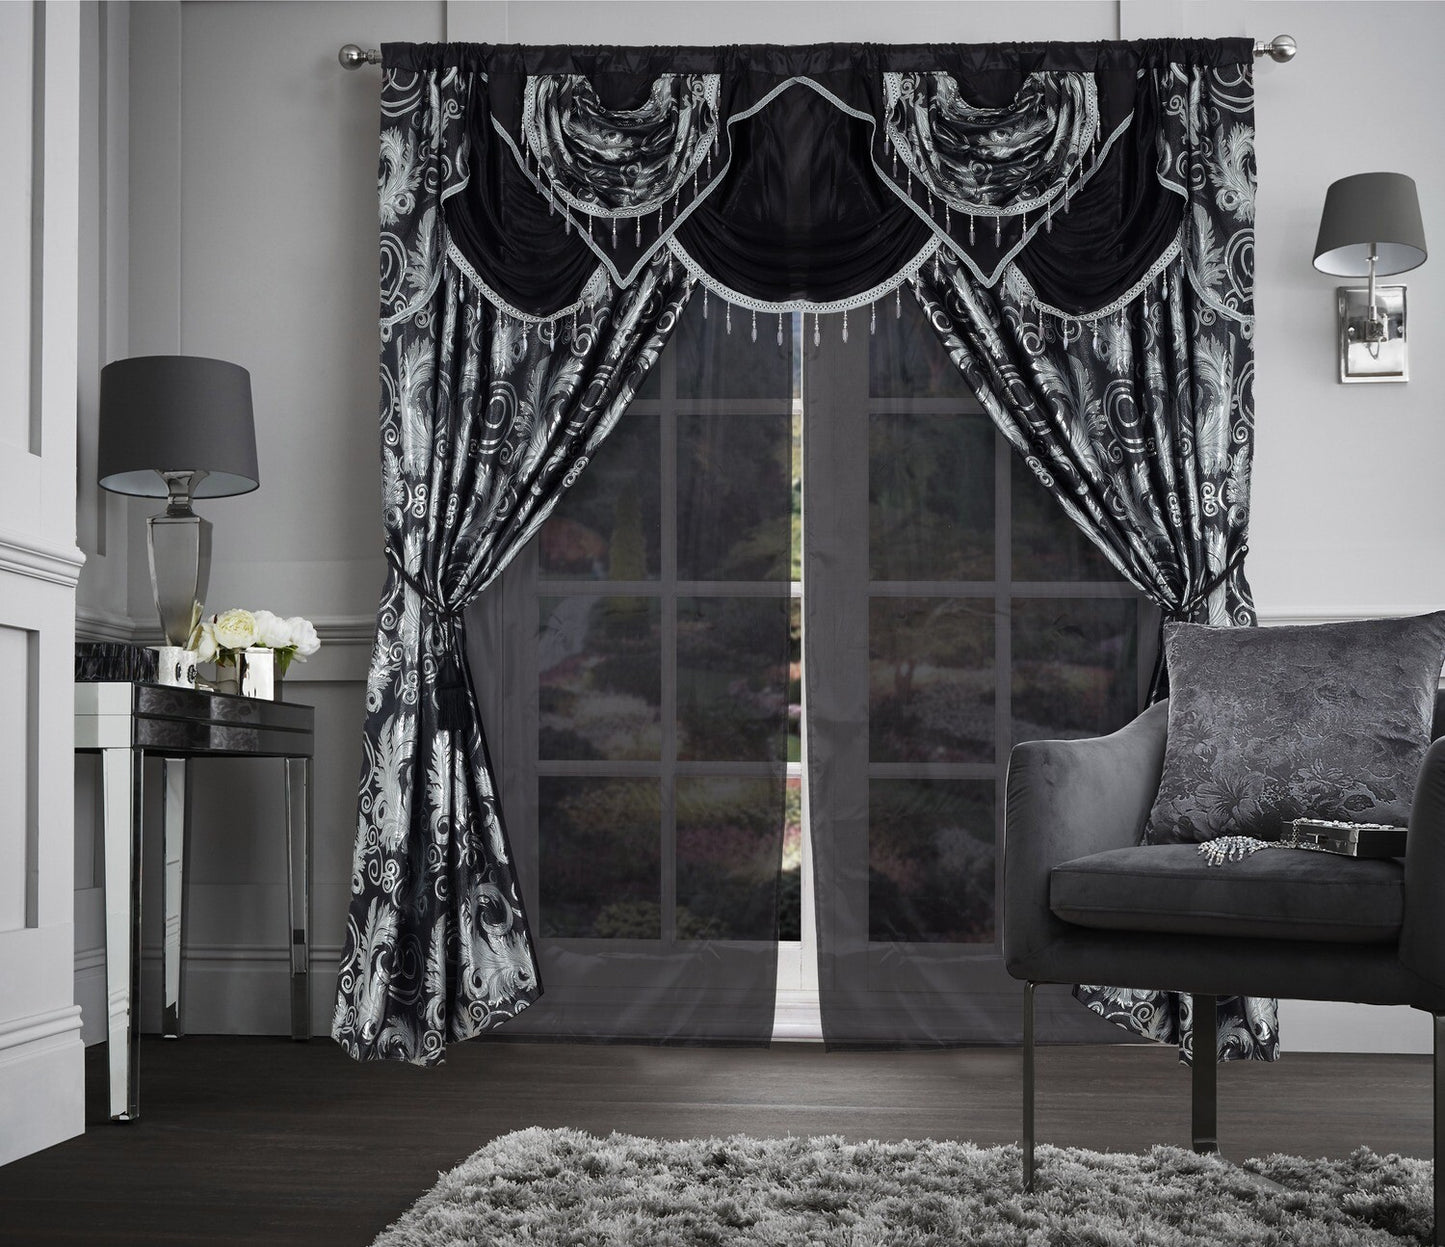 Glory Rugs Jacquard Luxury Curtain Window Panel Set Curtain with Attached Valance and Backing Bedroom Living Room Dining 110"X84" Each Jana Black